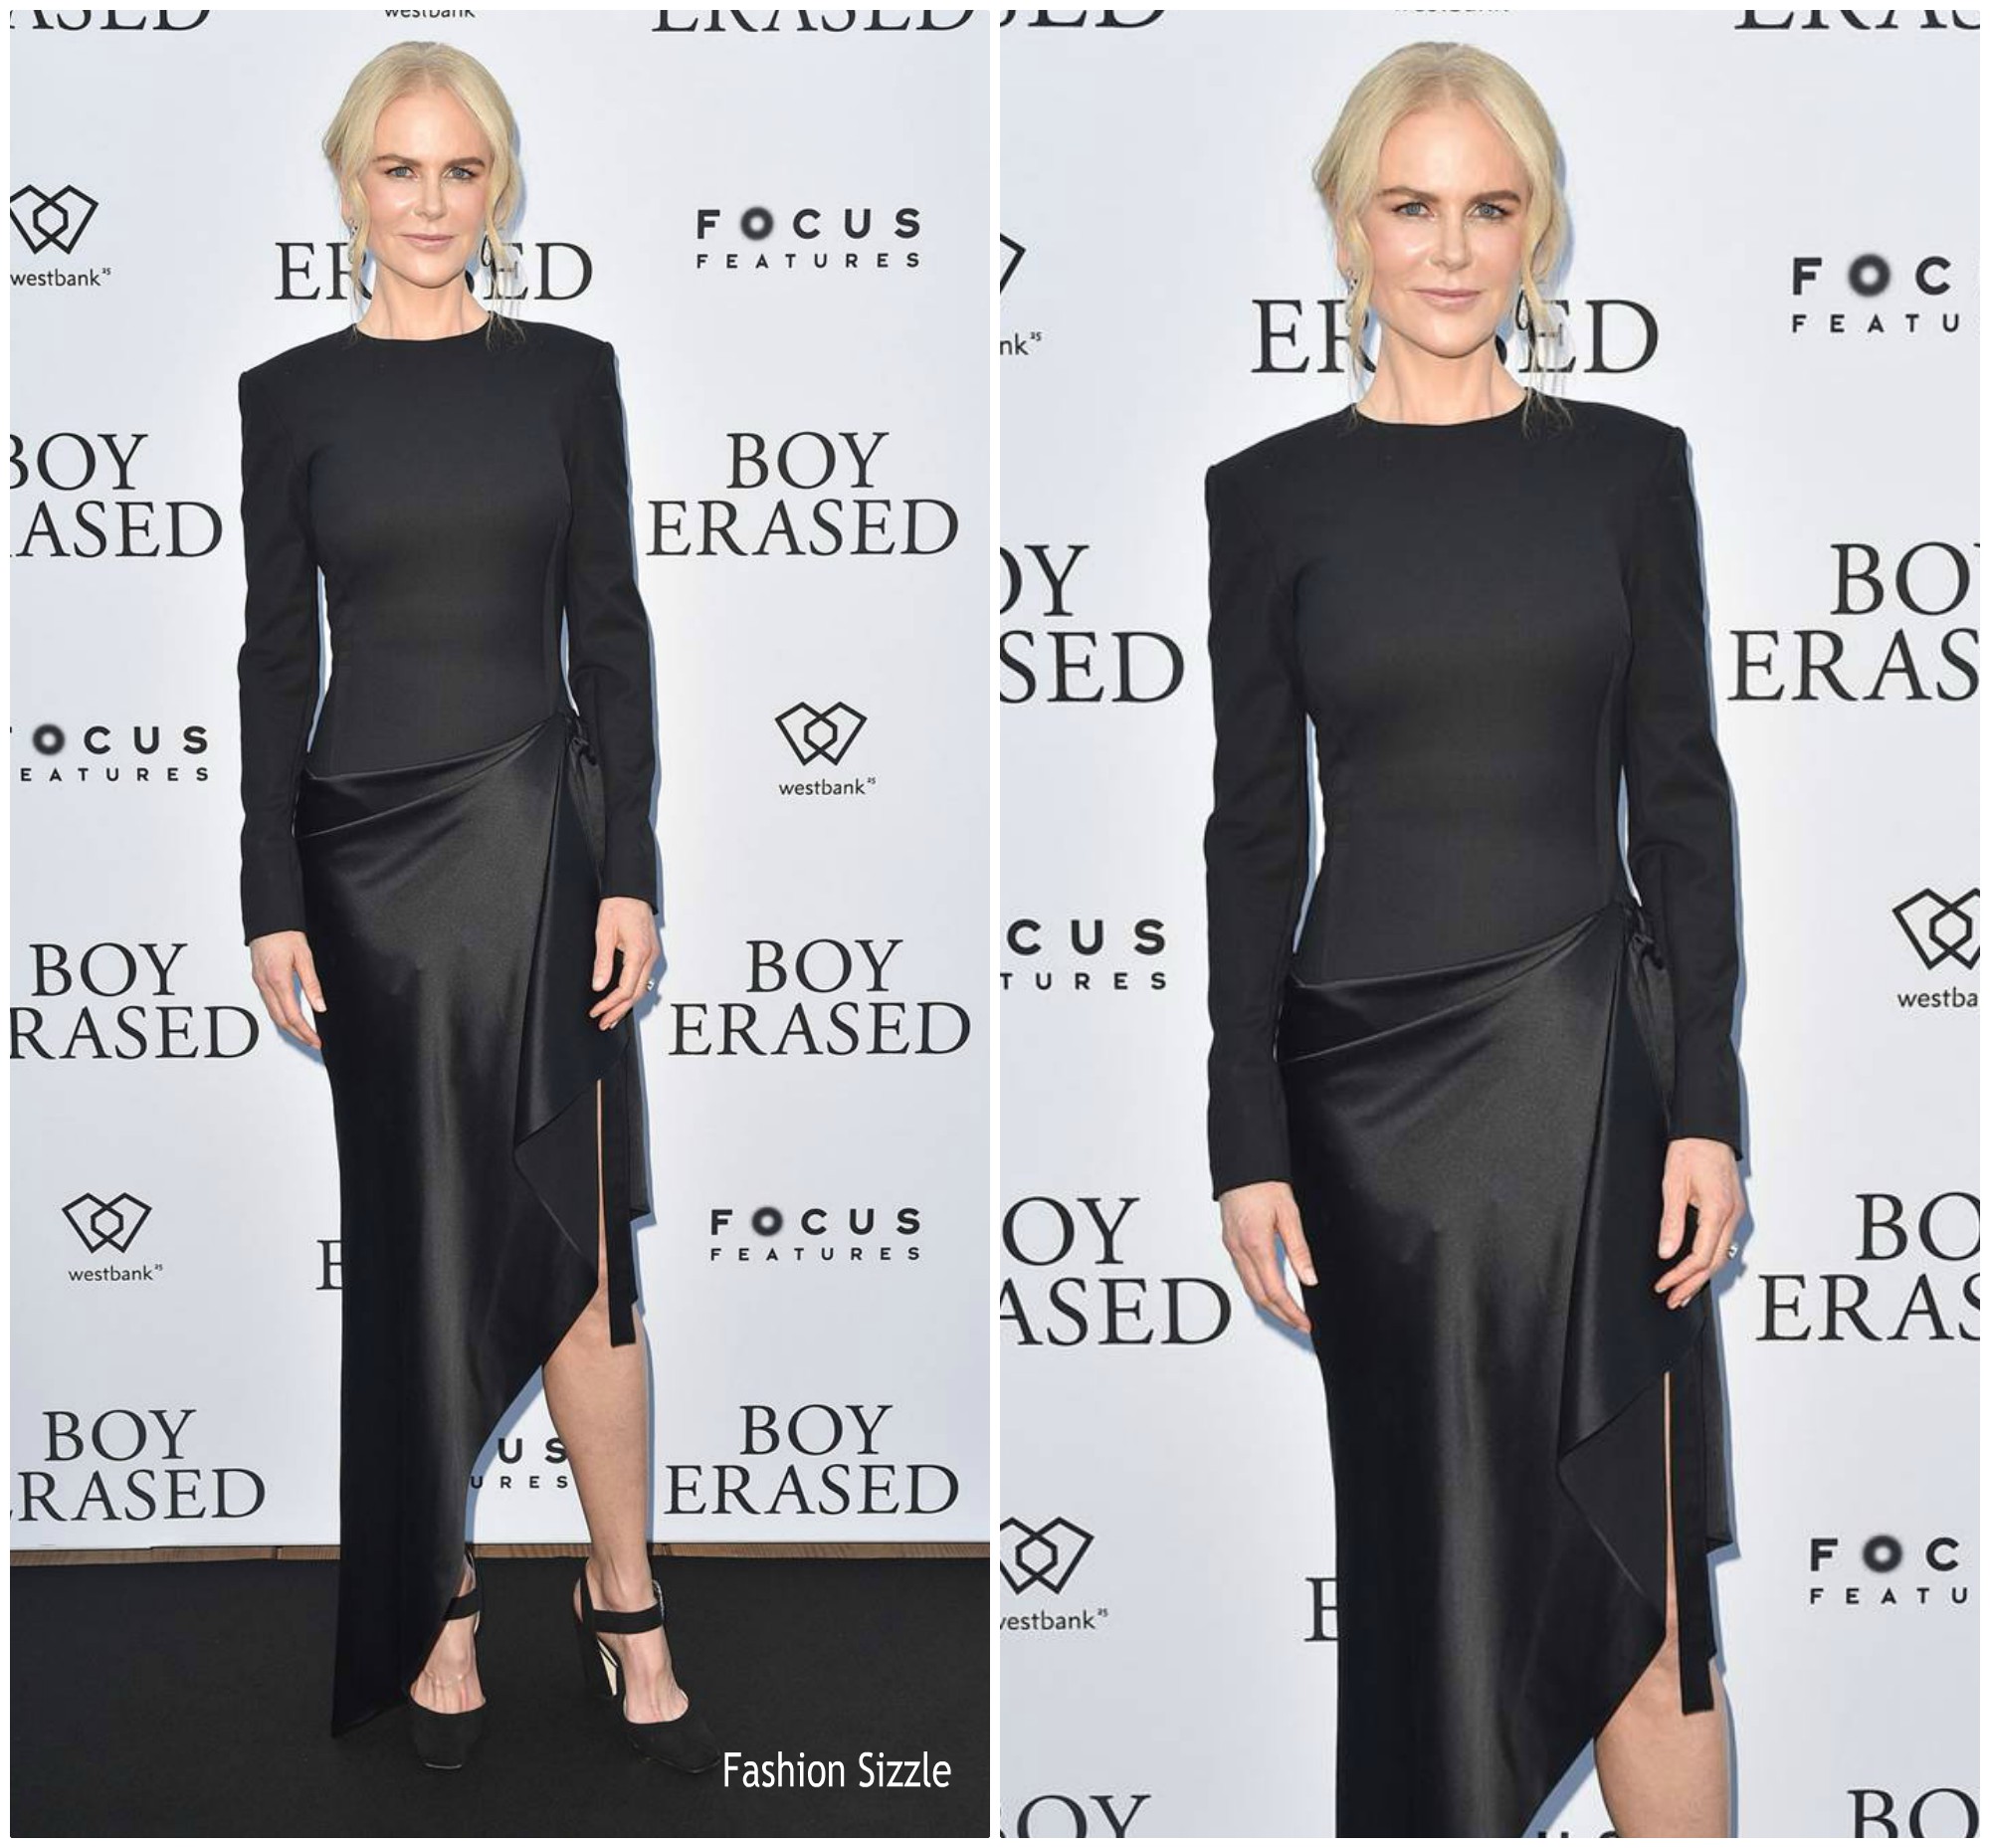 nicole-kidman-in-monse-focus-features-westbank-present-the-boy-erased-party-toronto